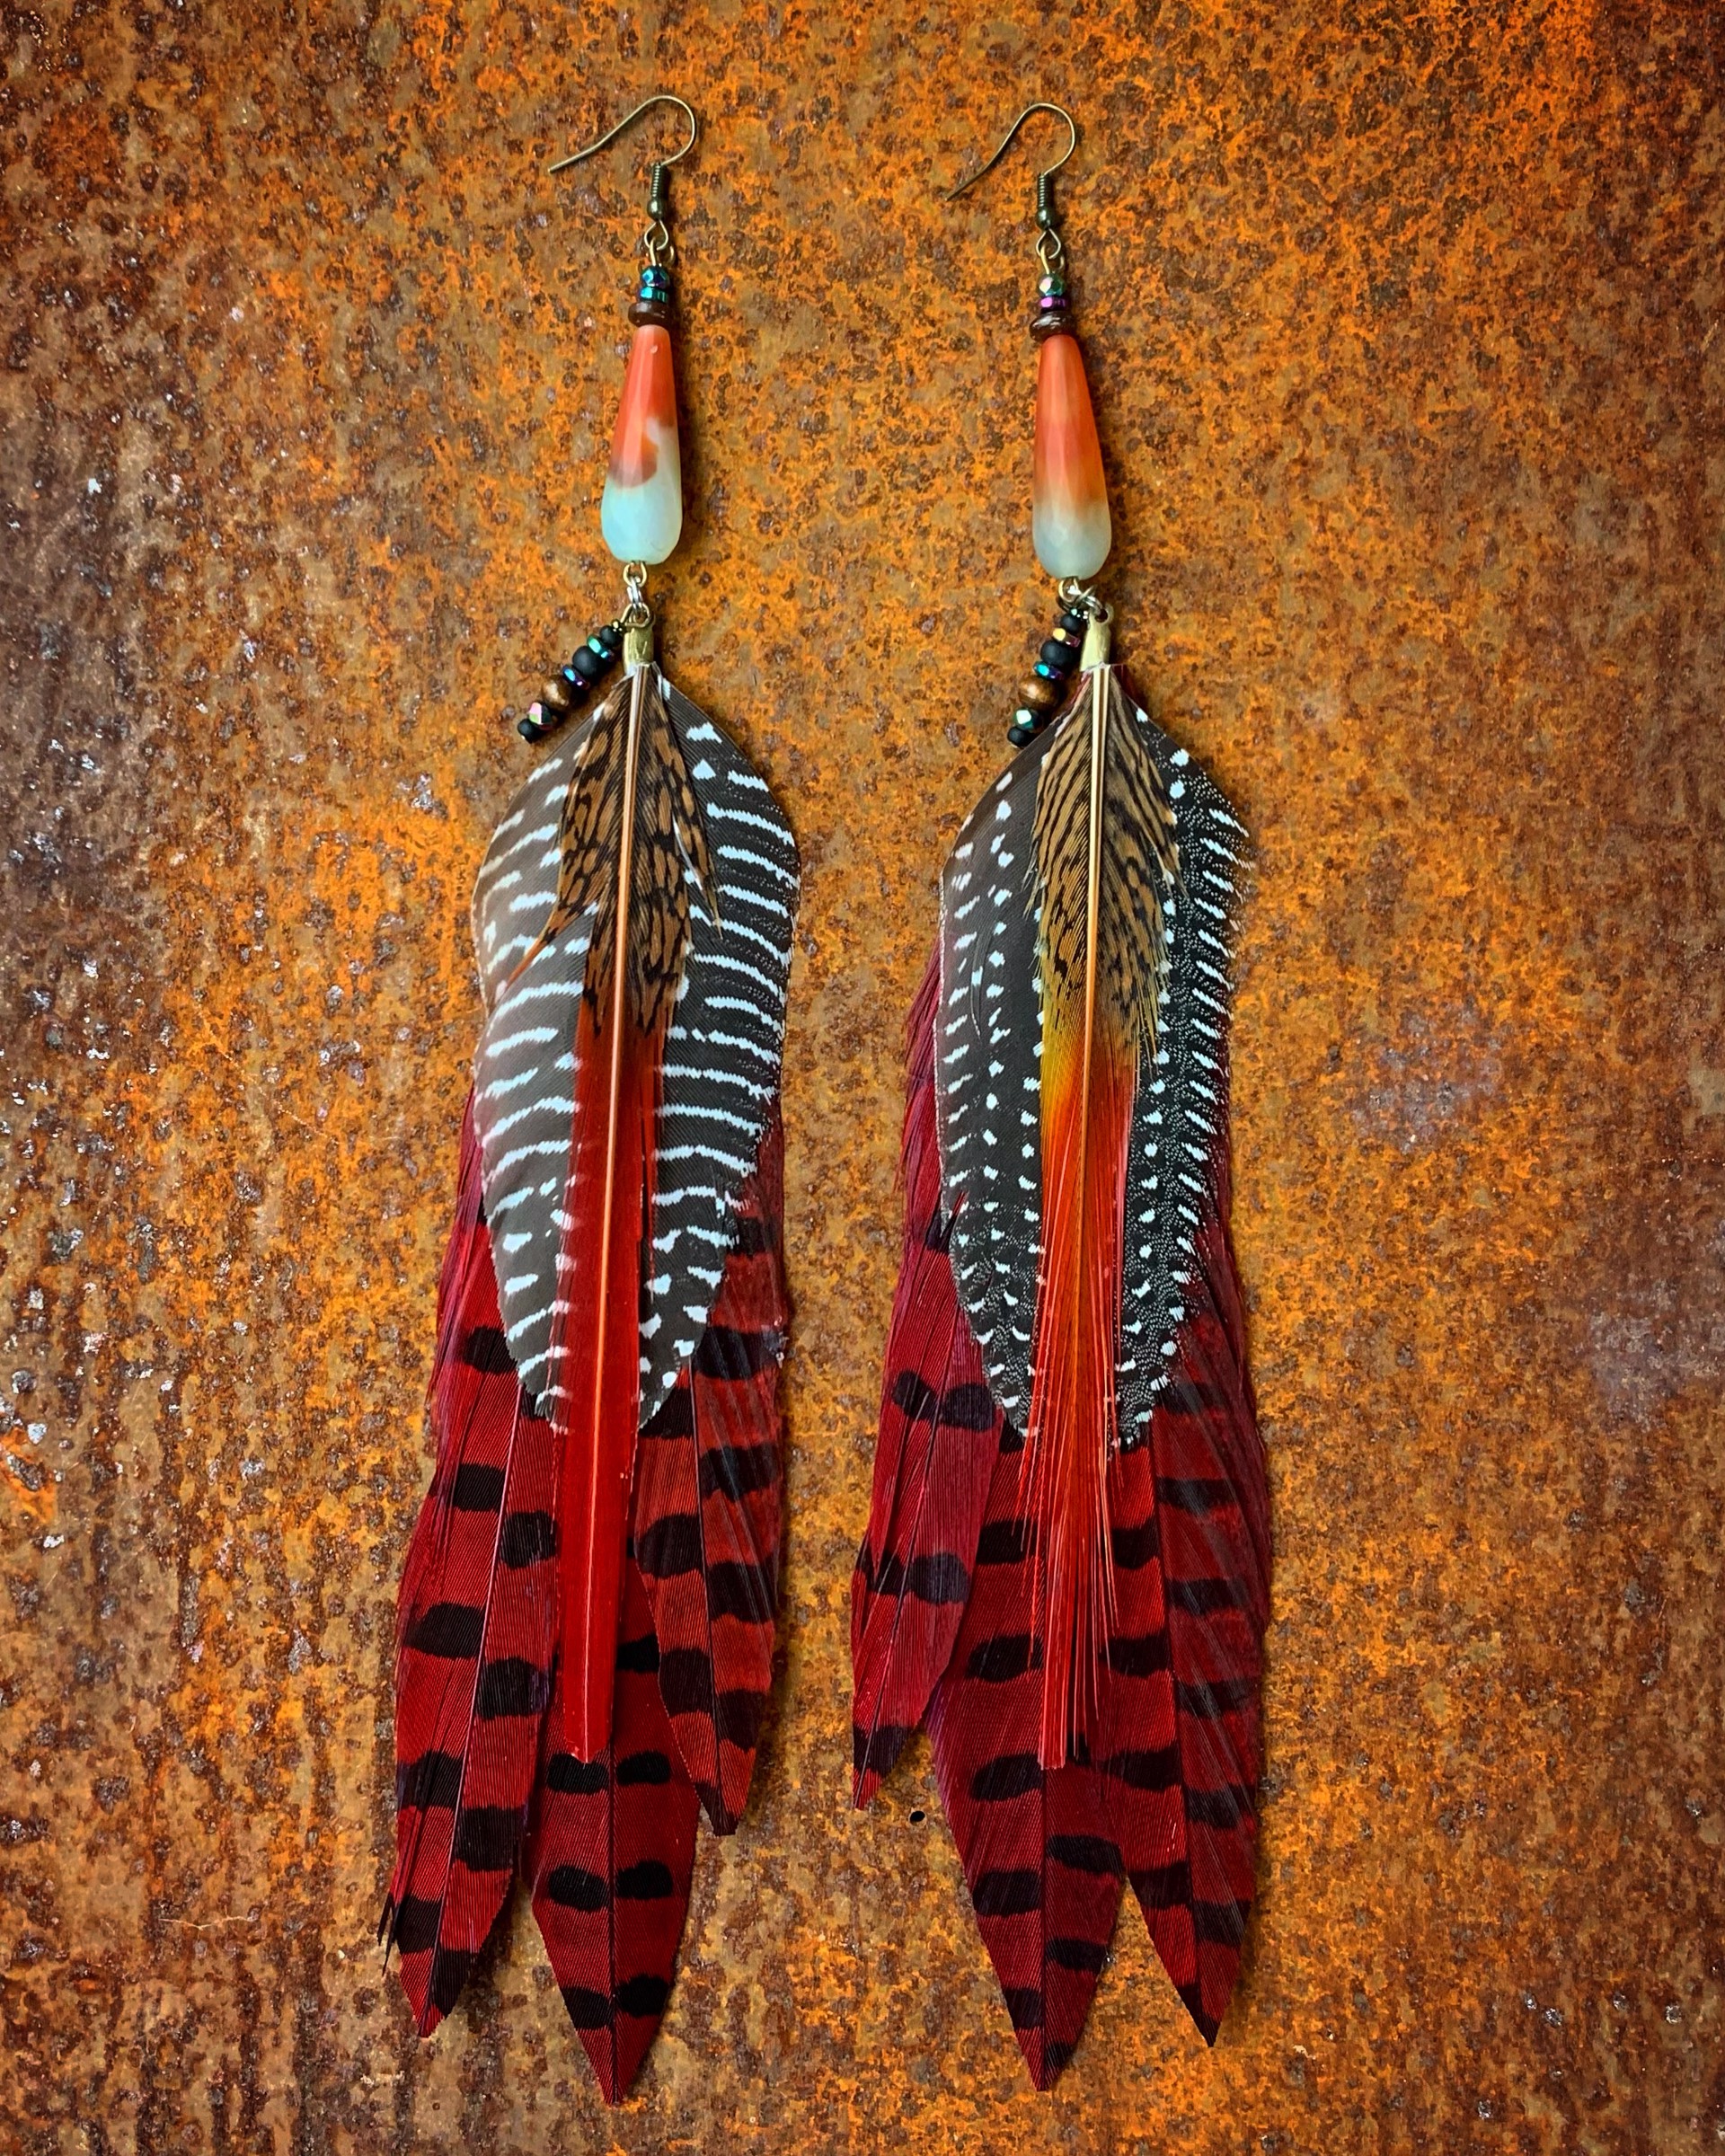 K602 Rainbow Agate with Pheasant Feathers Earrings by Kelly Ormsby